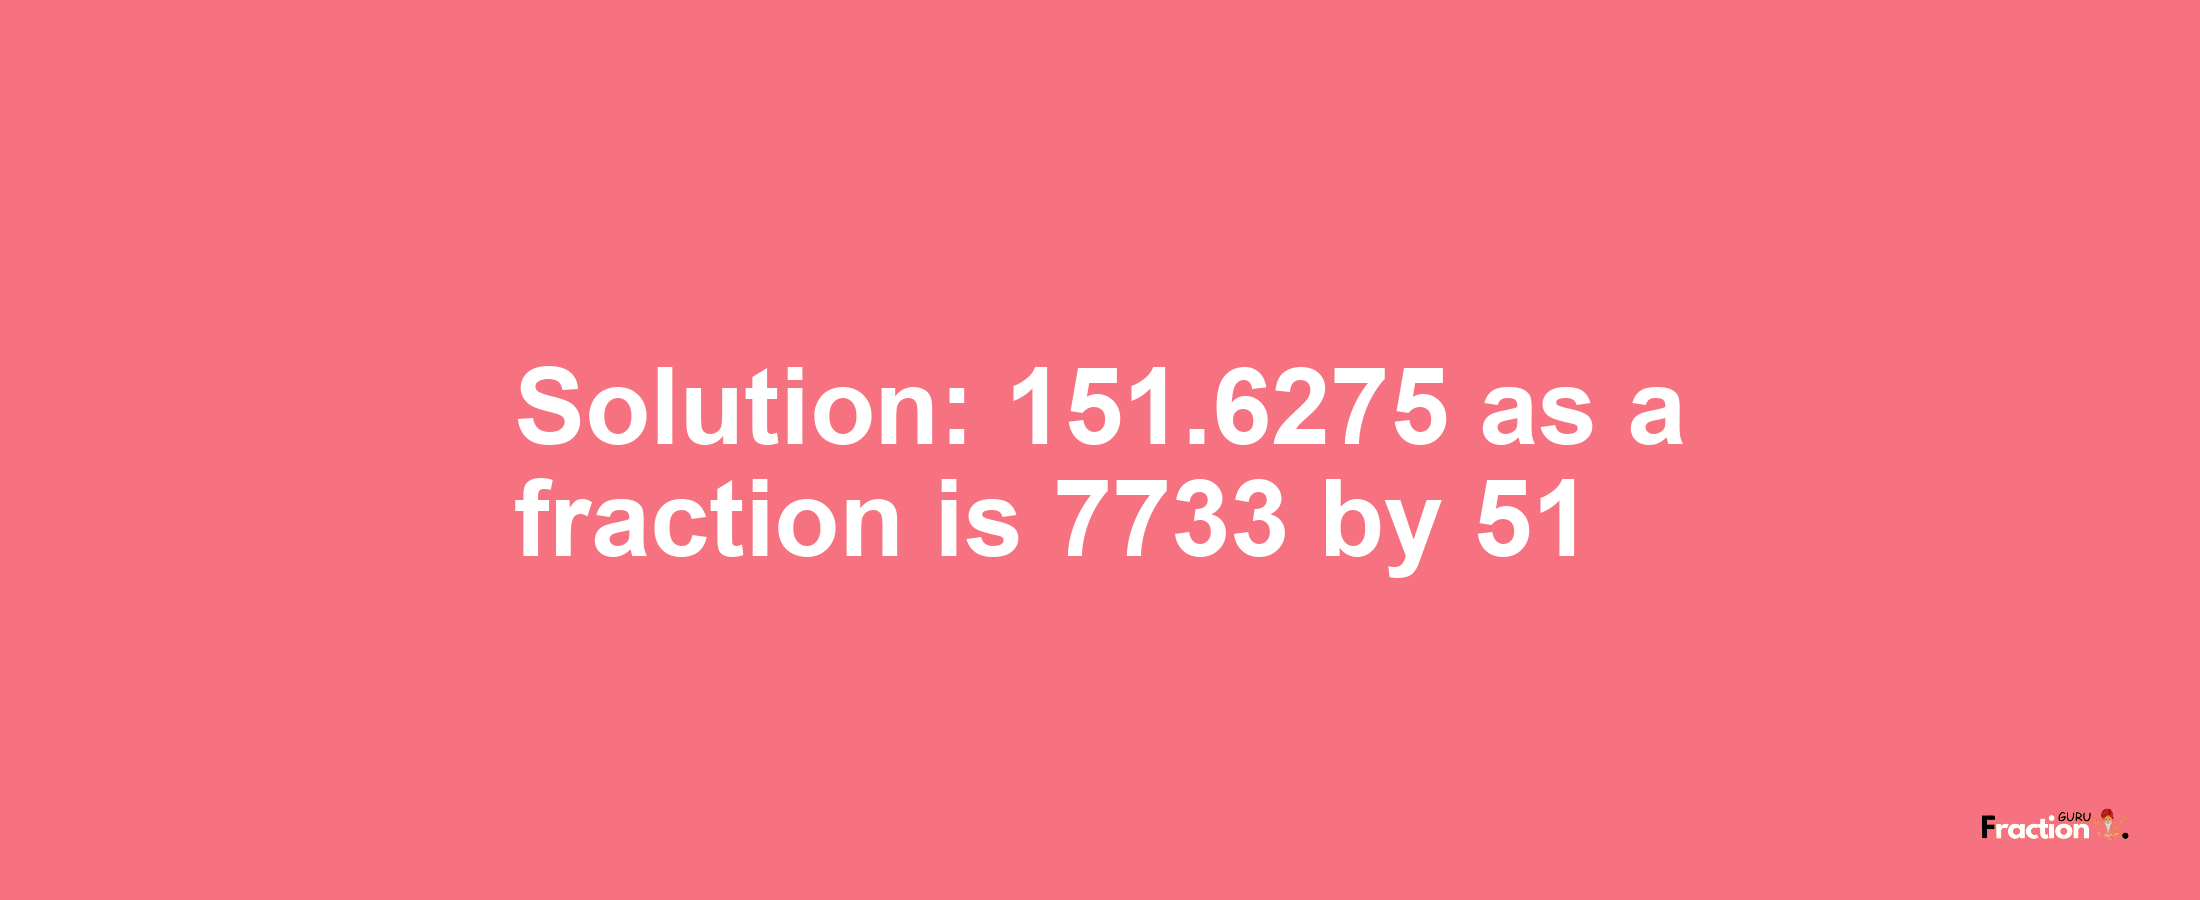 Solution:151.6275 as a fraction is 7733/51